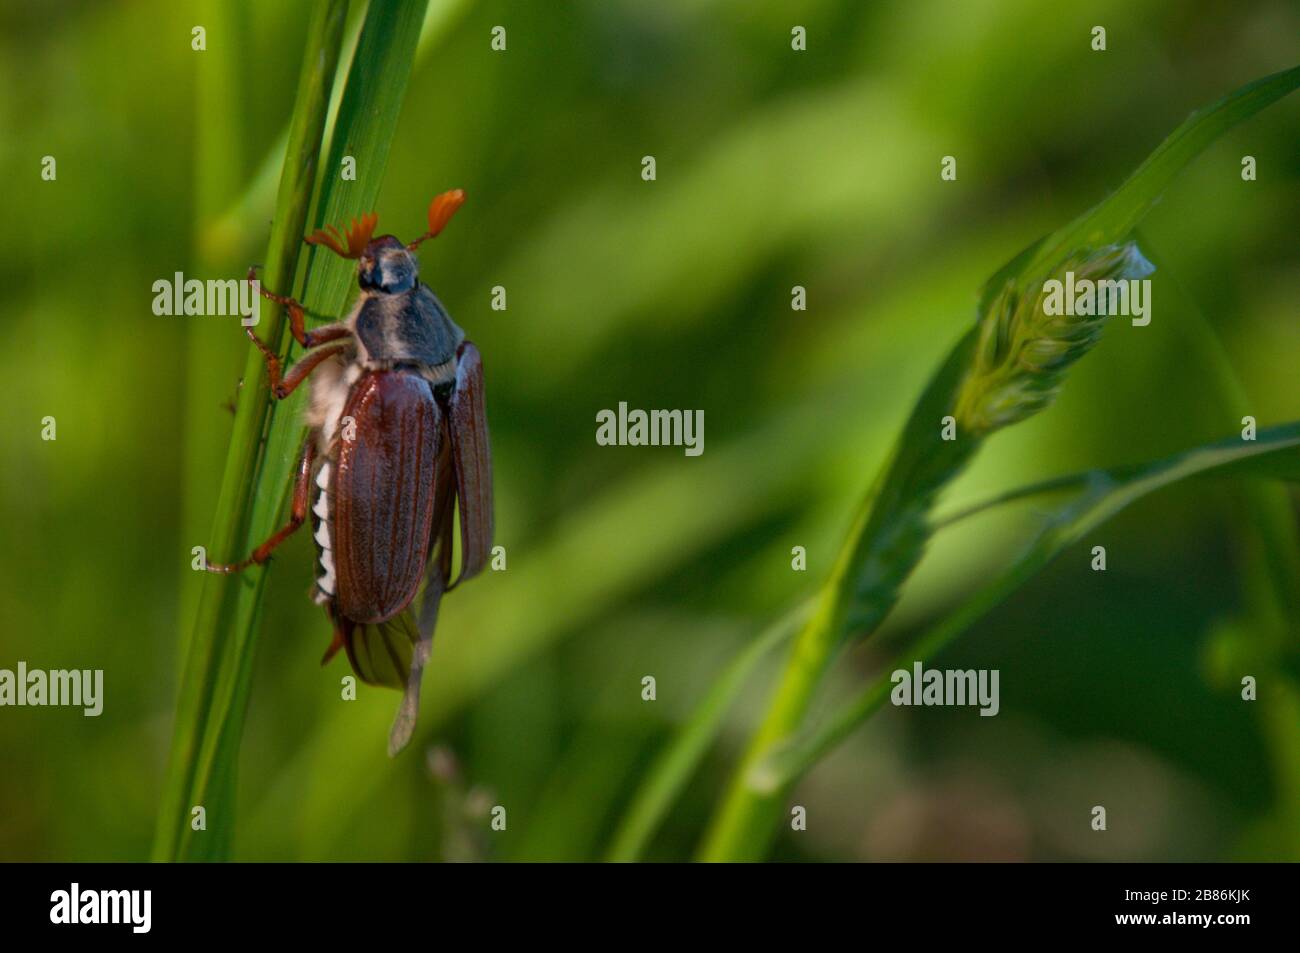 Cockchafer beetle is trying to climb up a blade of grass. Close-up view. Stock Photo